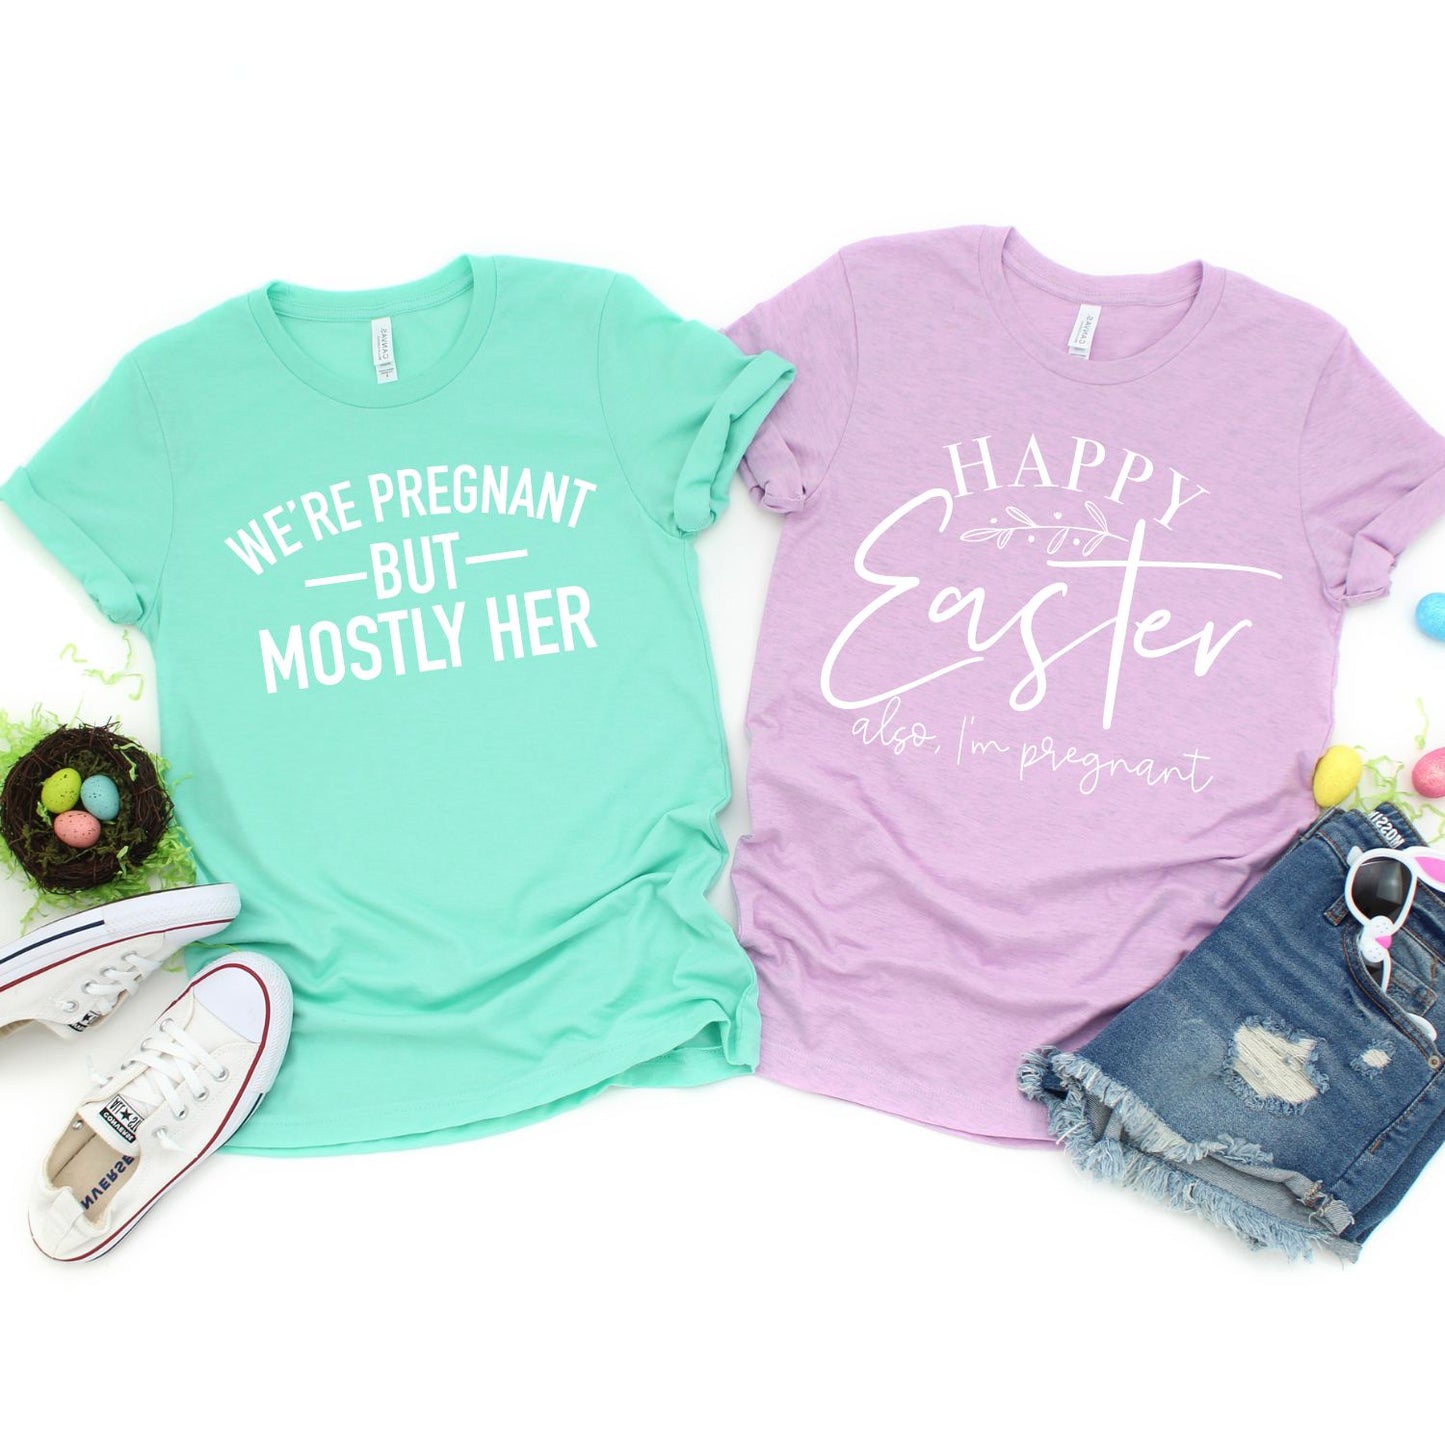 Happy Easter Also, I'm Pregnant | Easter Pregnancy Announcement Shirts